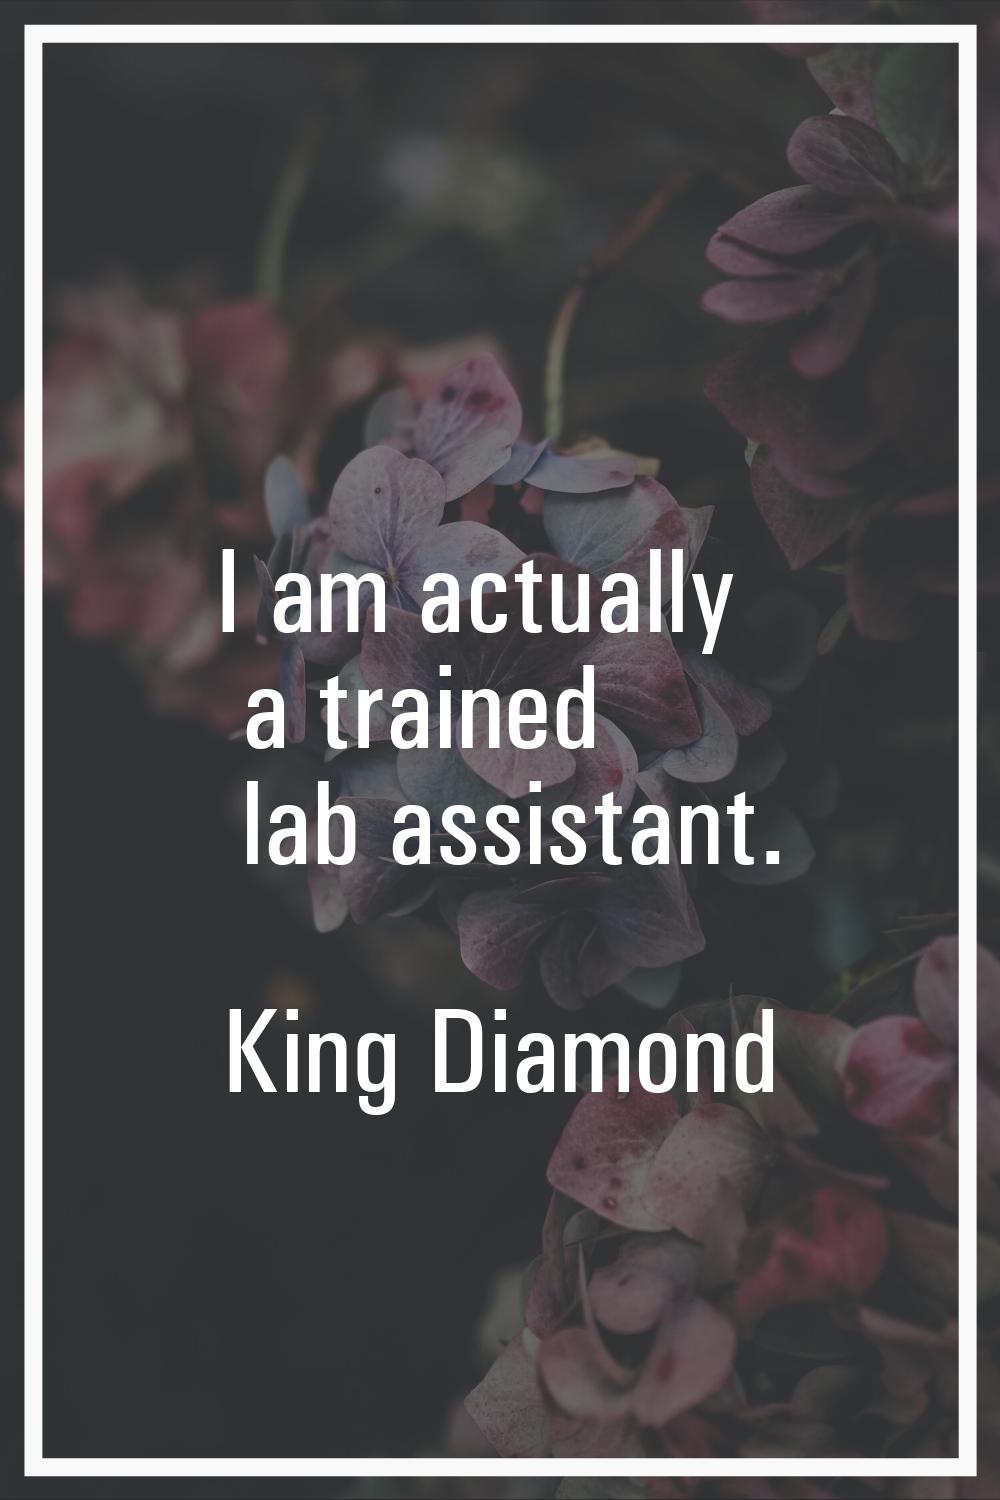 I am actually a trained lab assistant.